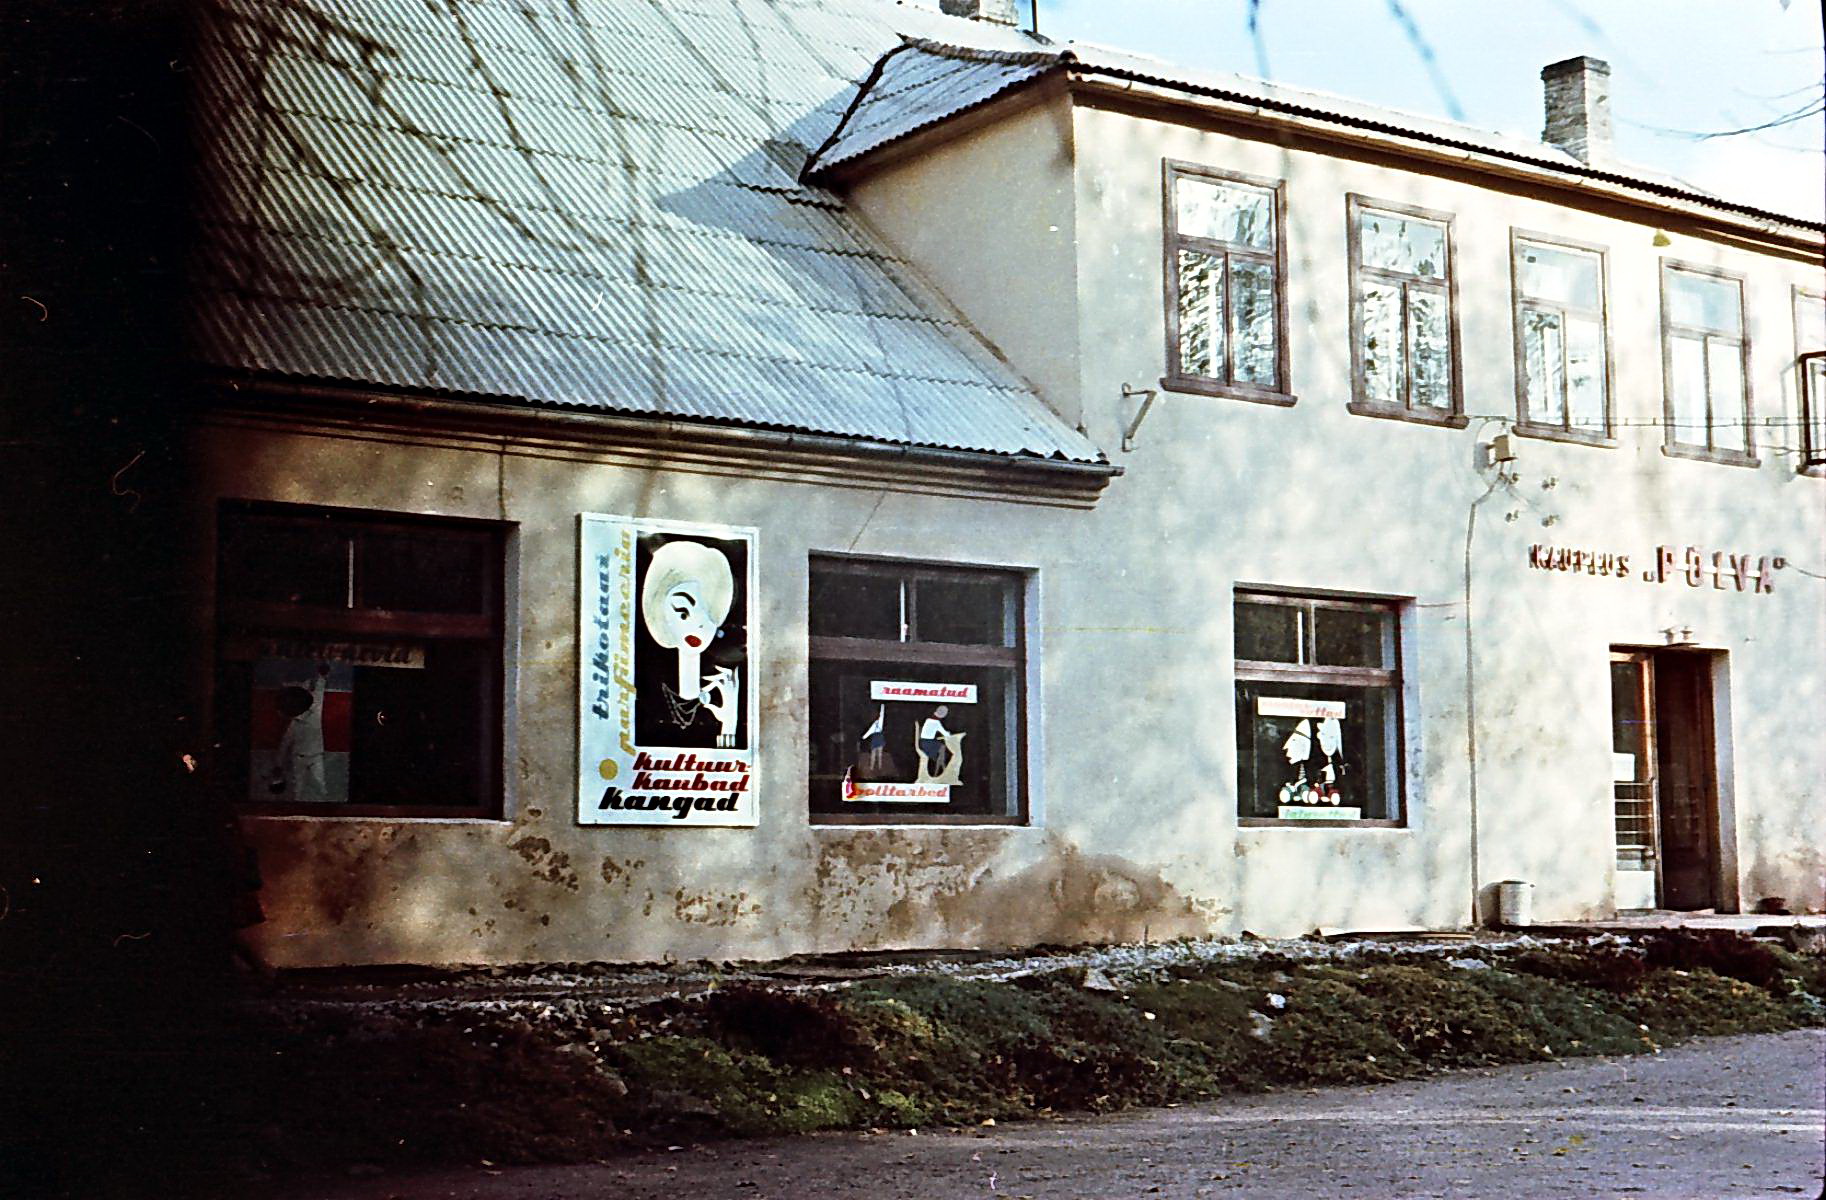 Cultural goods store in 1963